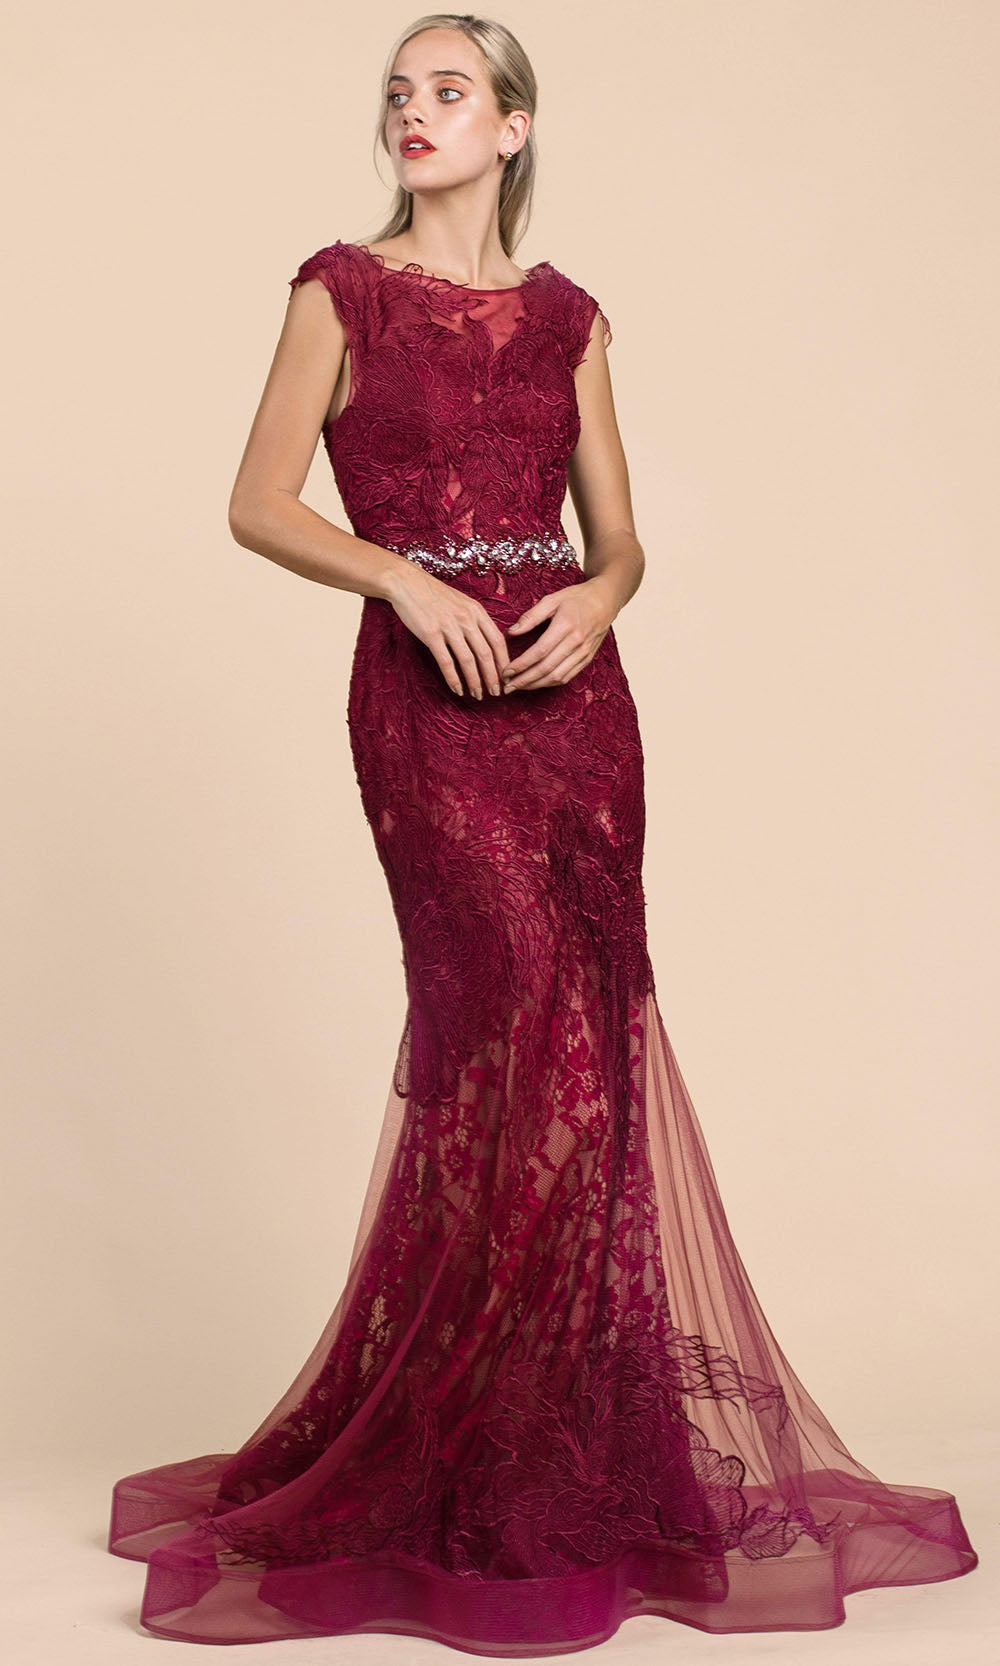 Andrea and Leo - A0225 Lace Mermaid Gown With Beaded Belt In Burgundy